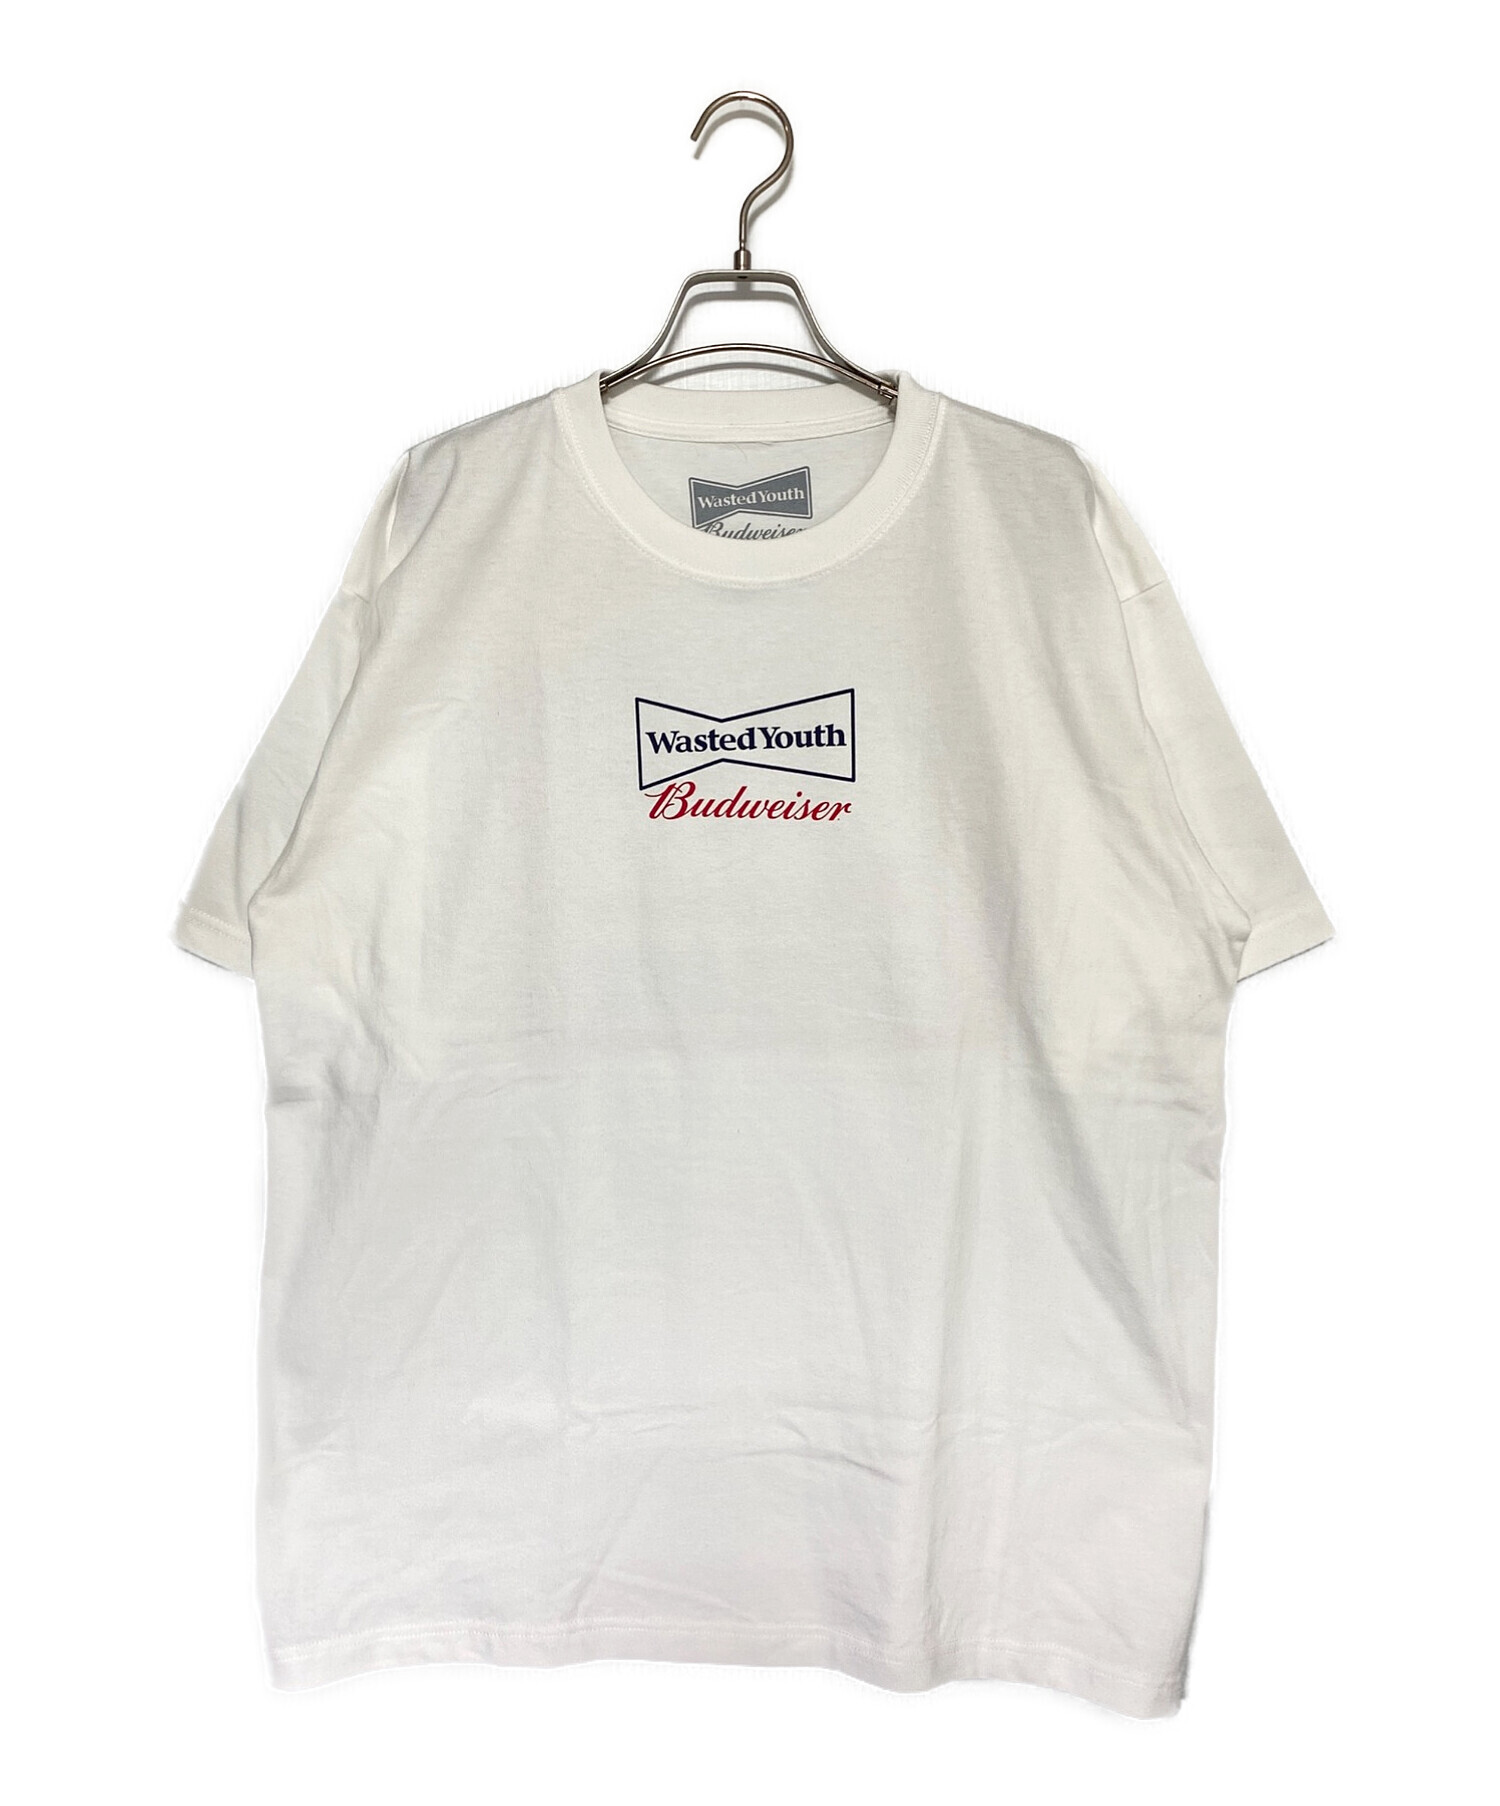 Wasted Youth × Budweiser Tシャツ - Tシャツ/カットソー(半袖/袖なし)